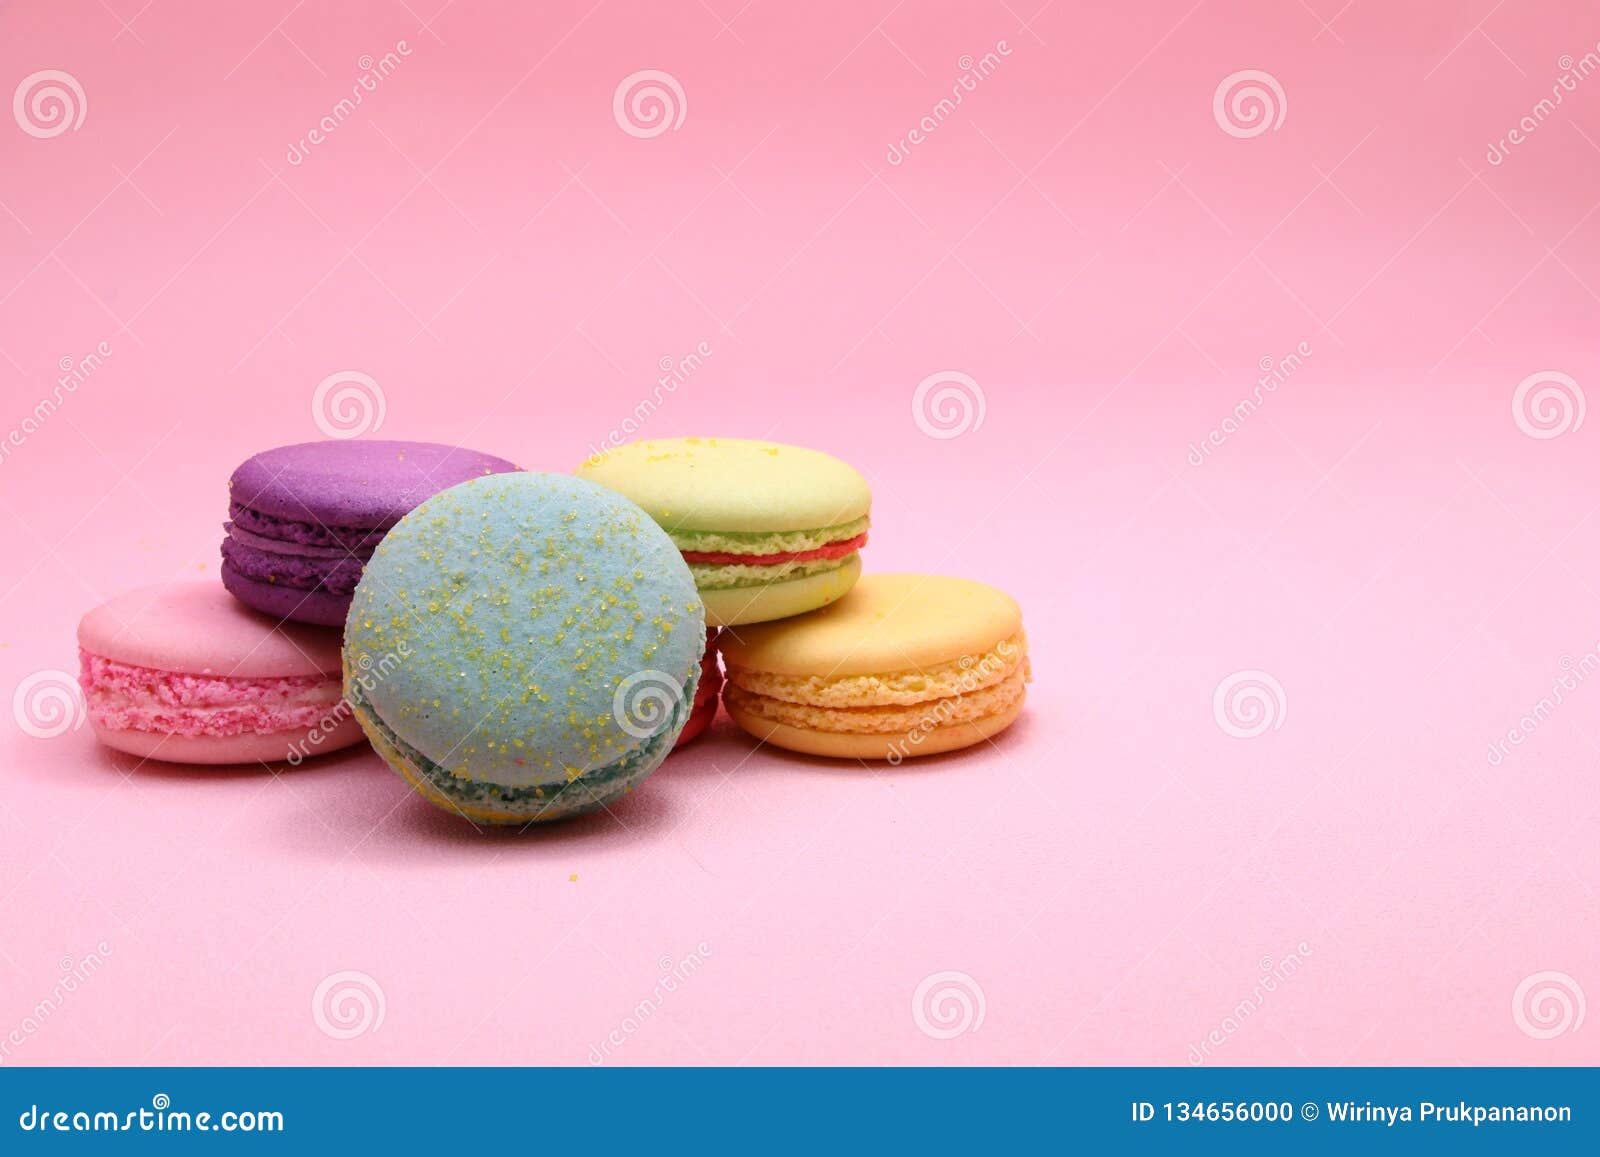 Colorful Cake Macaron or Macaroon on Pink Background from Top View ...